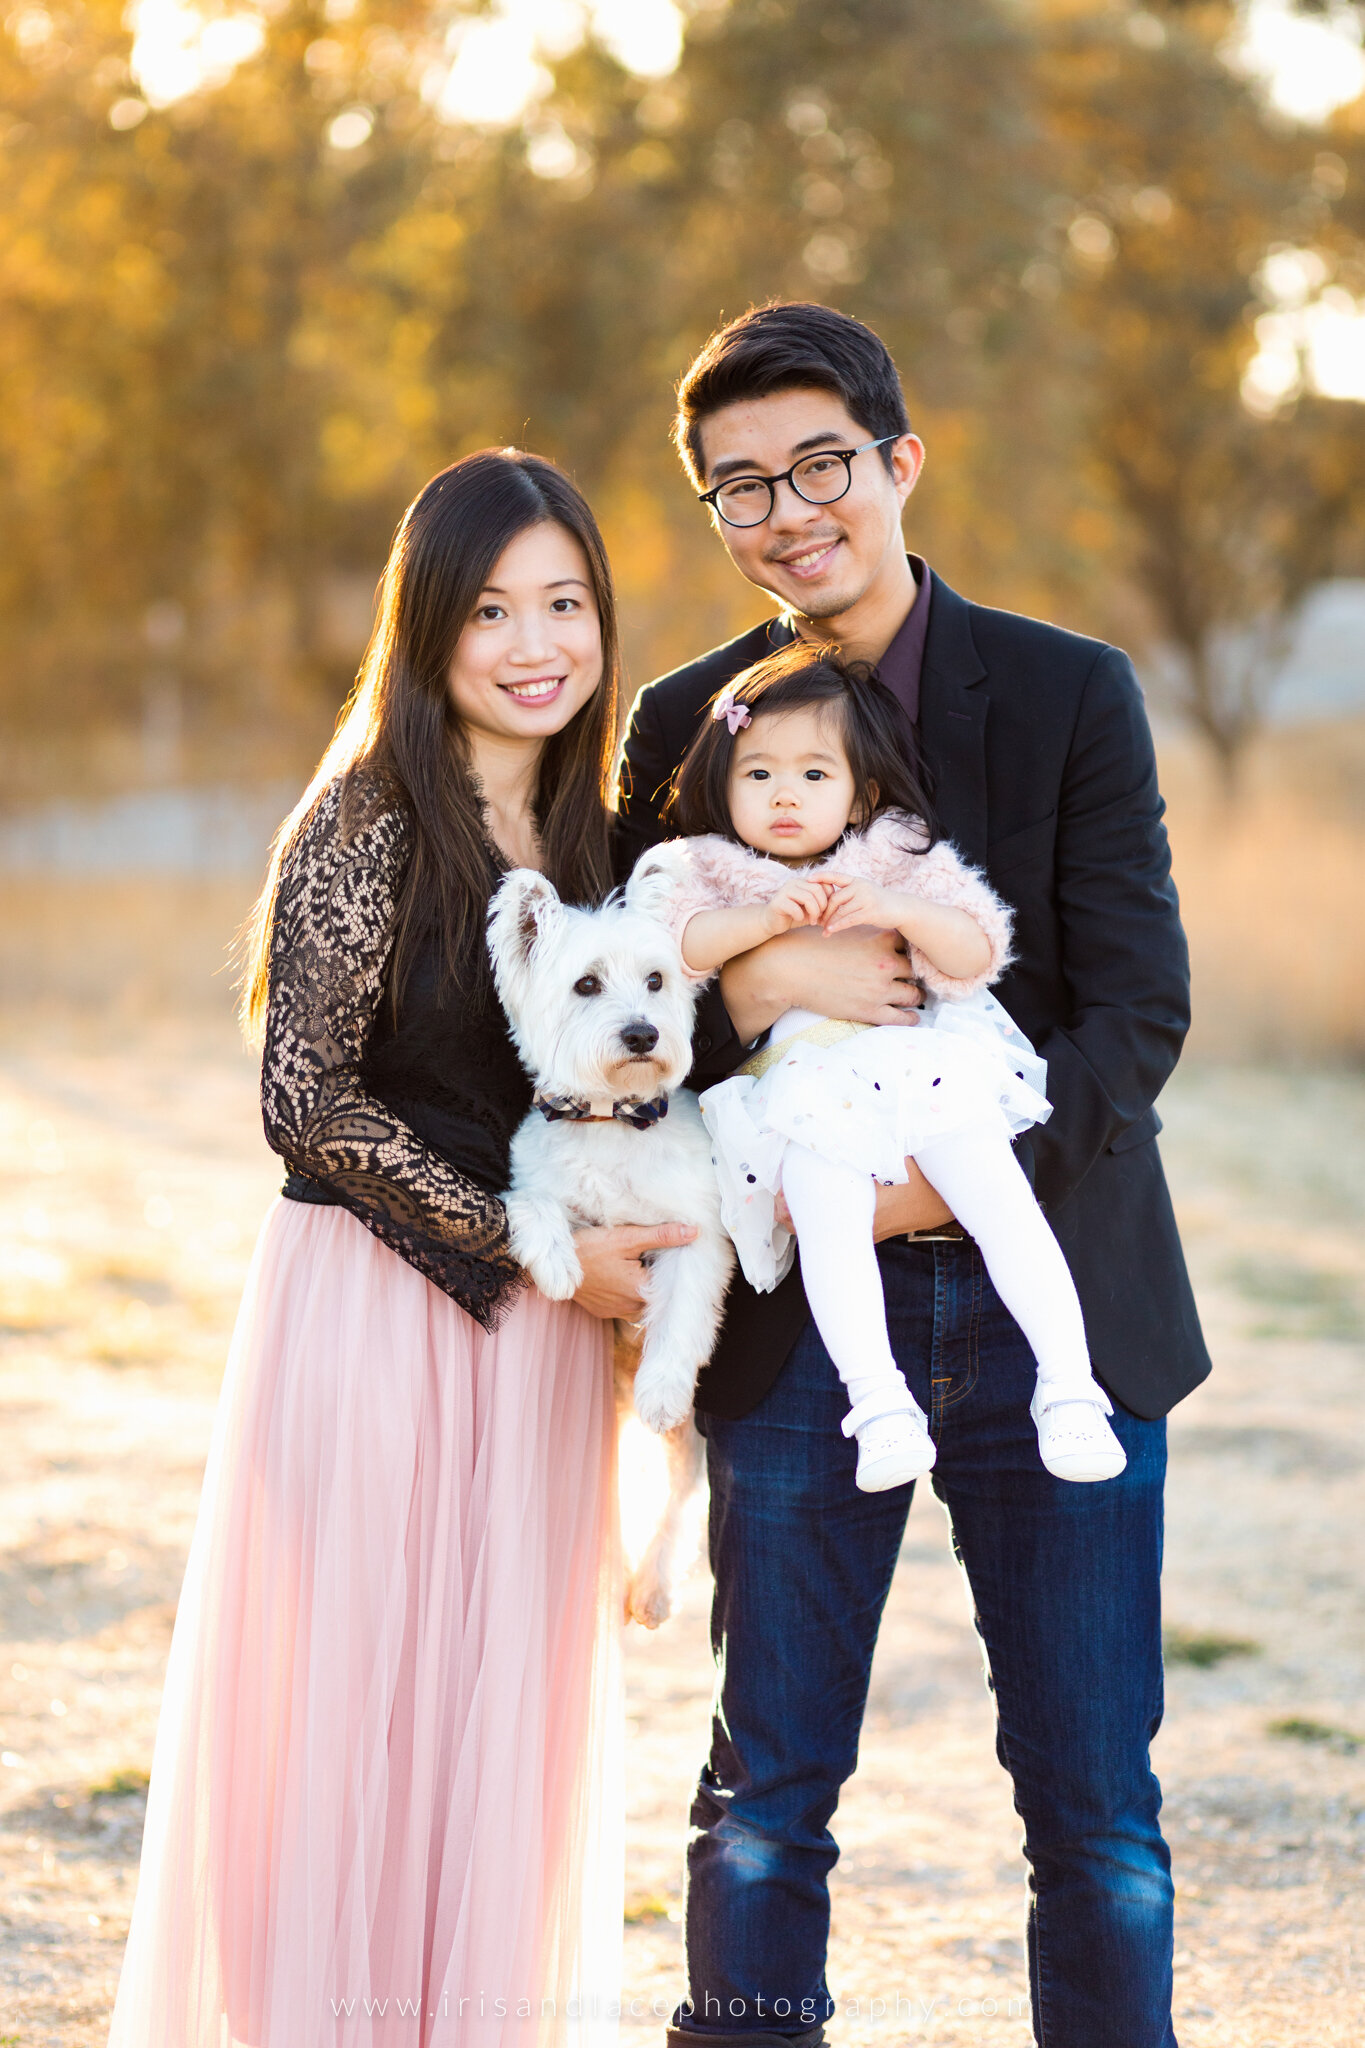 Family Photos with Dog and Toddler  |  SF Bay Area Family Photographer